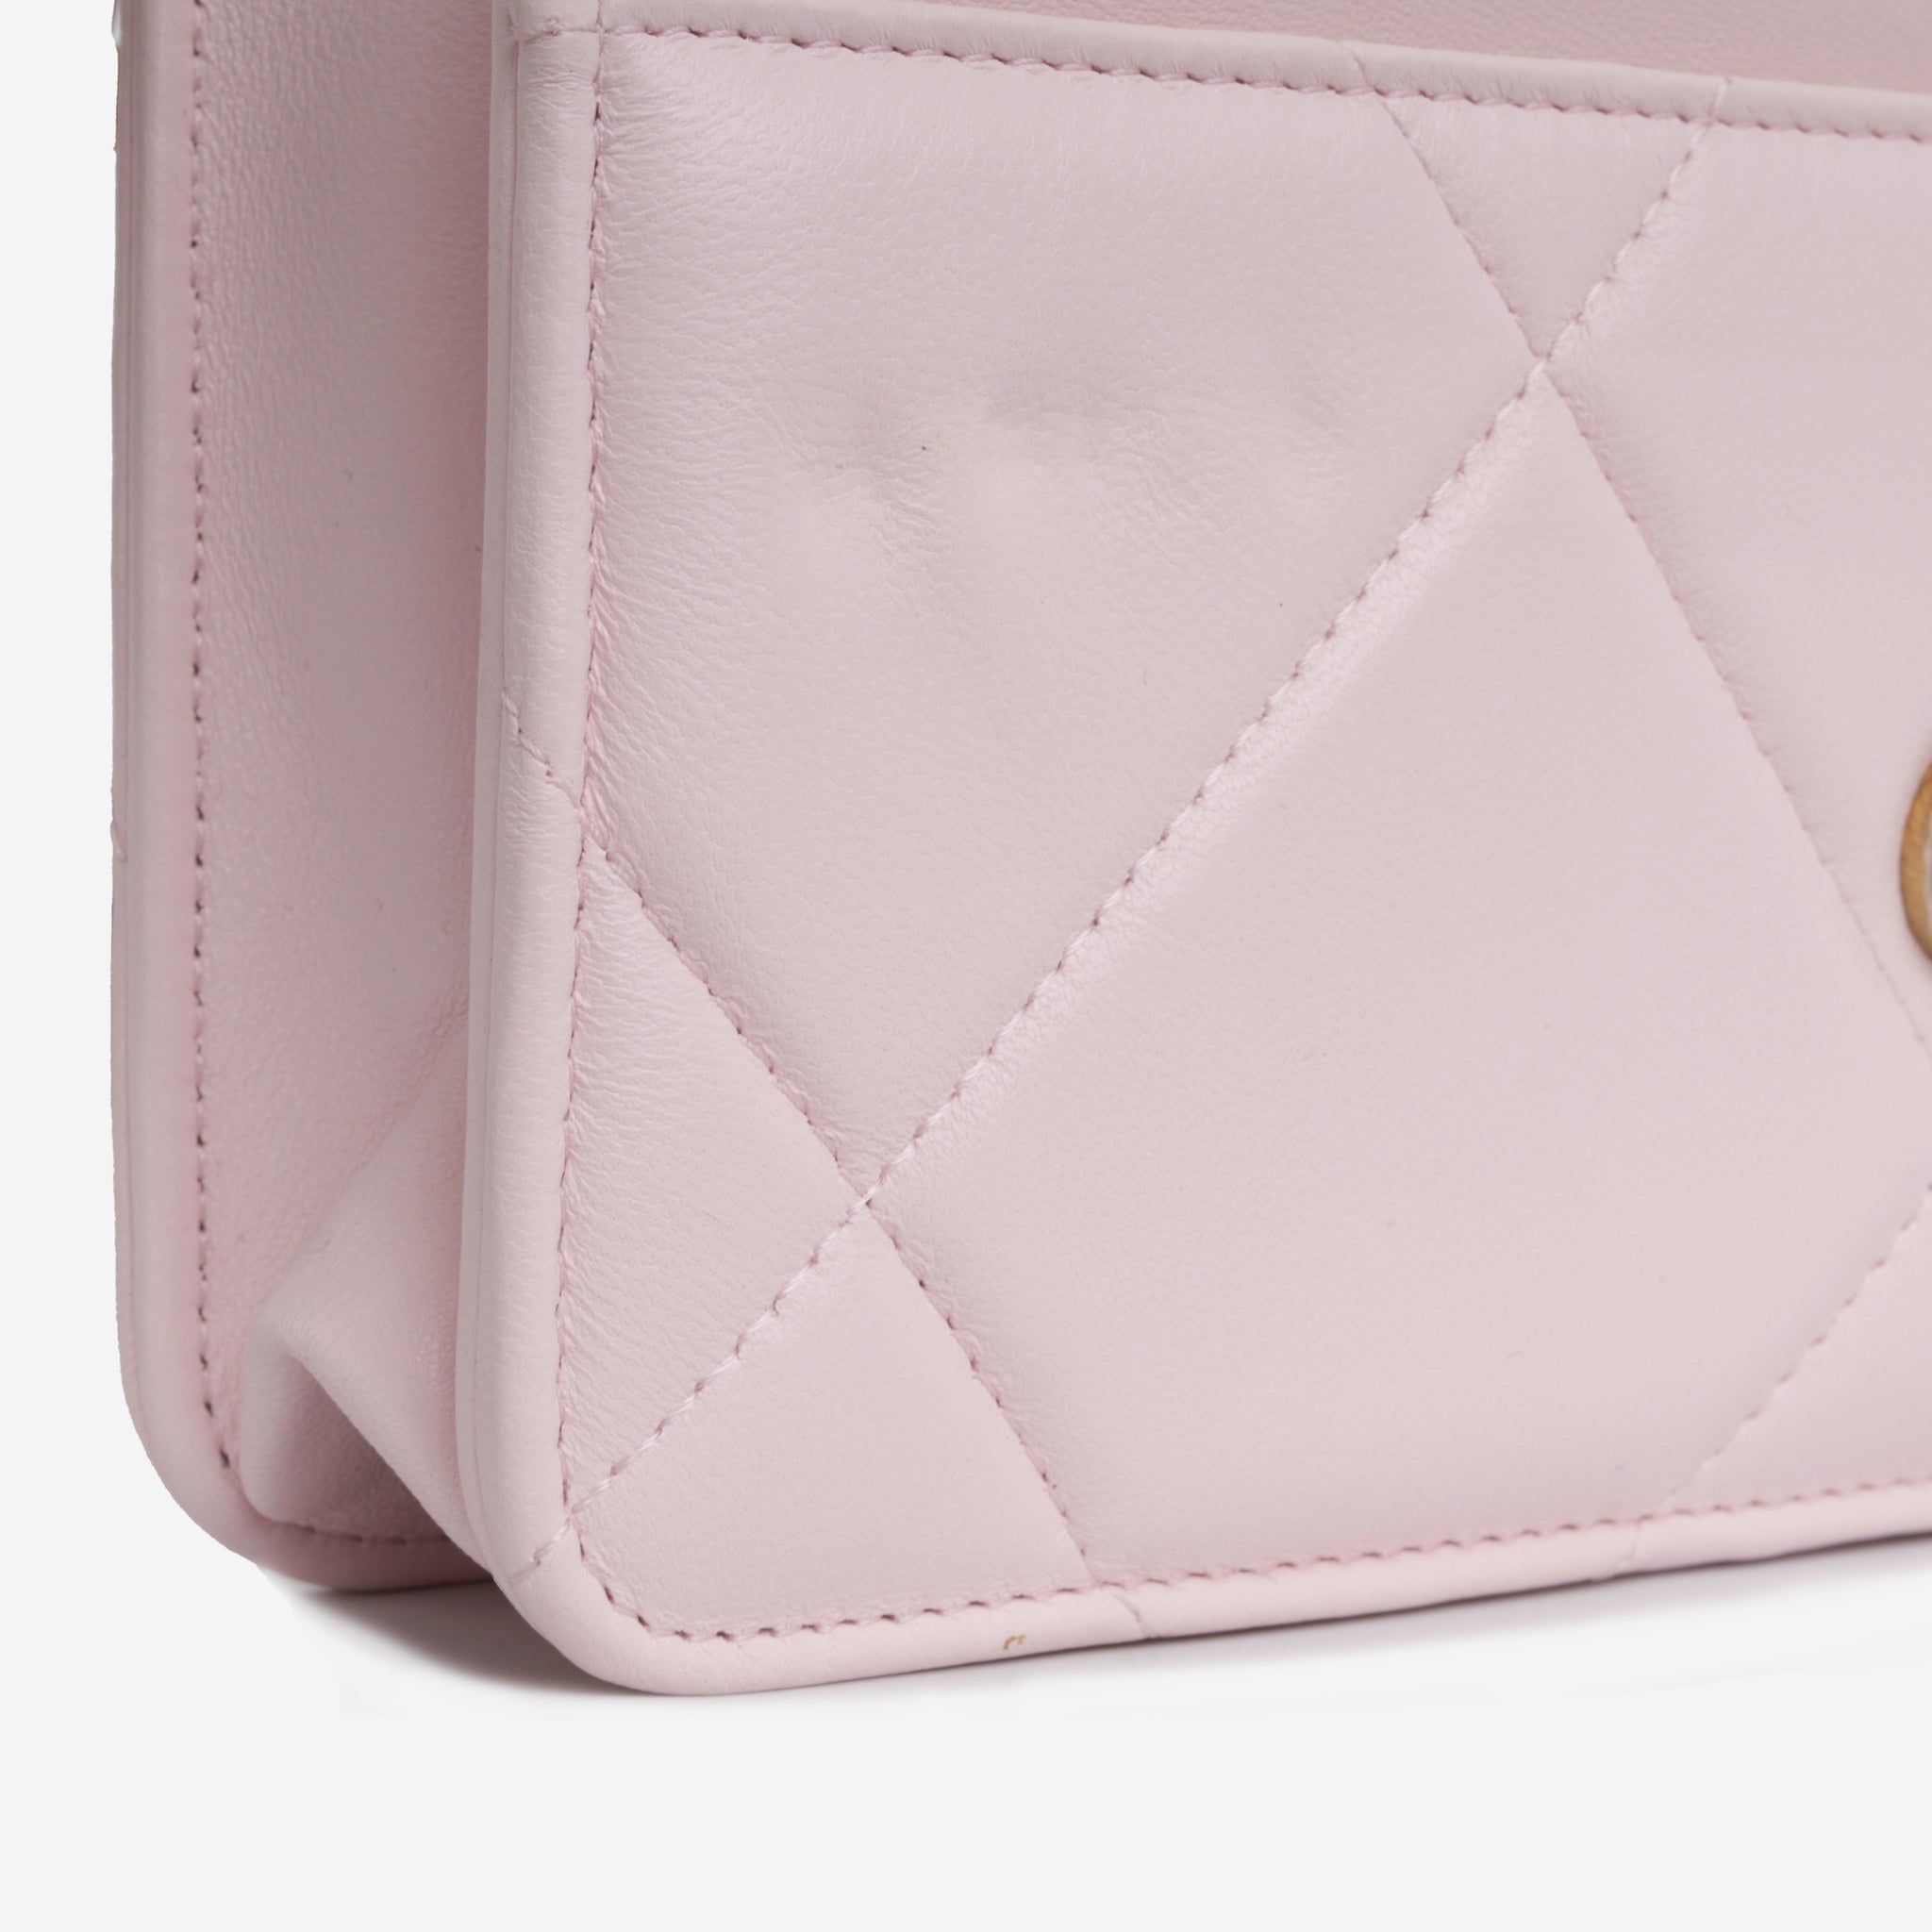 Chanel - Chanel 19 Flap WOC - Baby Pink - Lambskin - Excellent